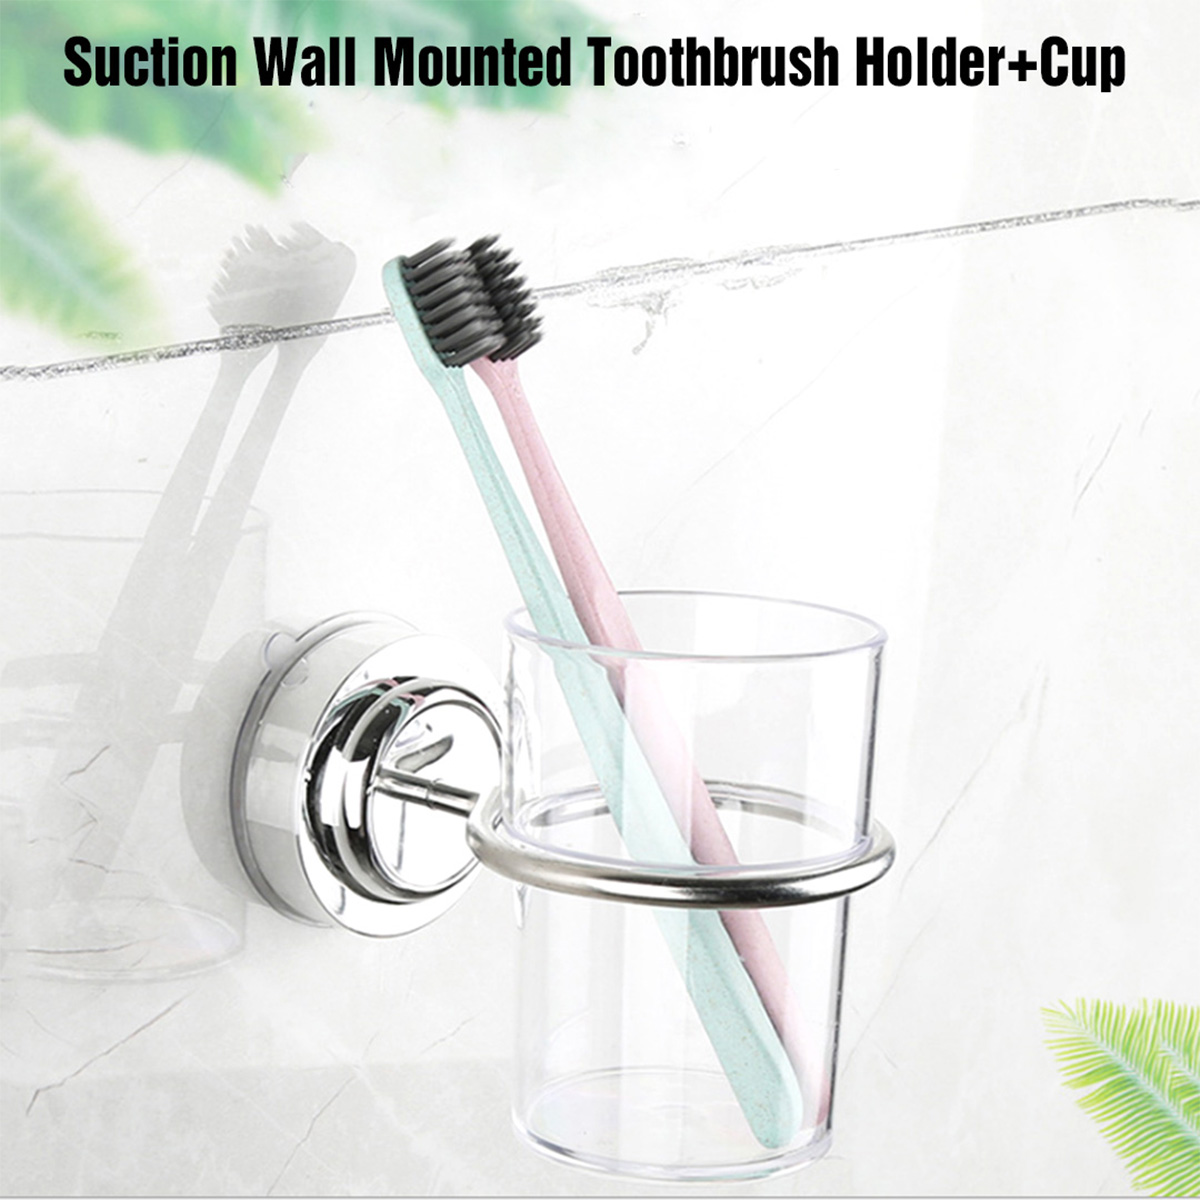 Bathroom-Suction-Wall-Mounted-Single-Stainless-Toothbrush-Tumbler-Holder-with-Cup-1758217-1